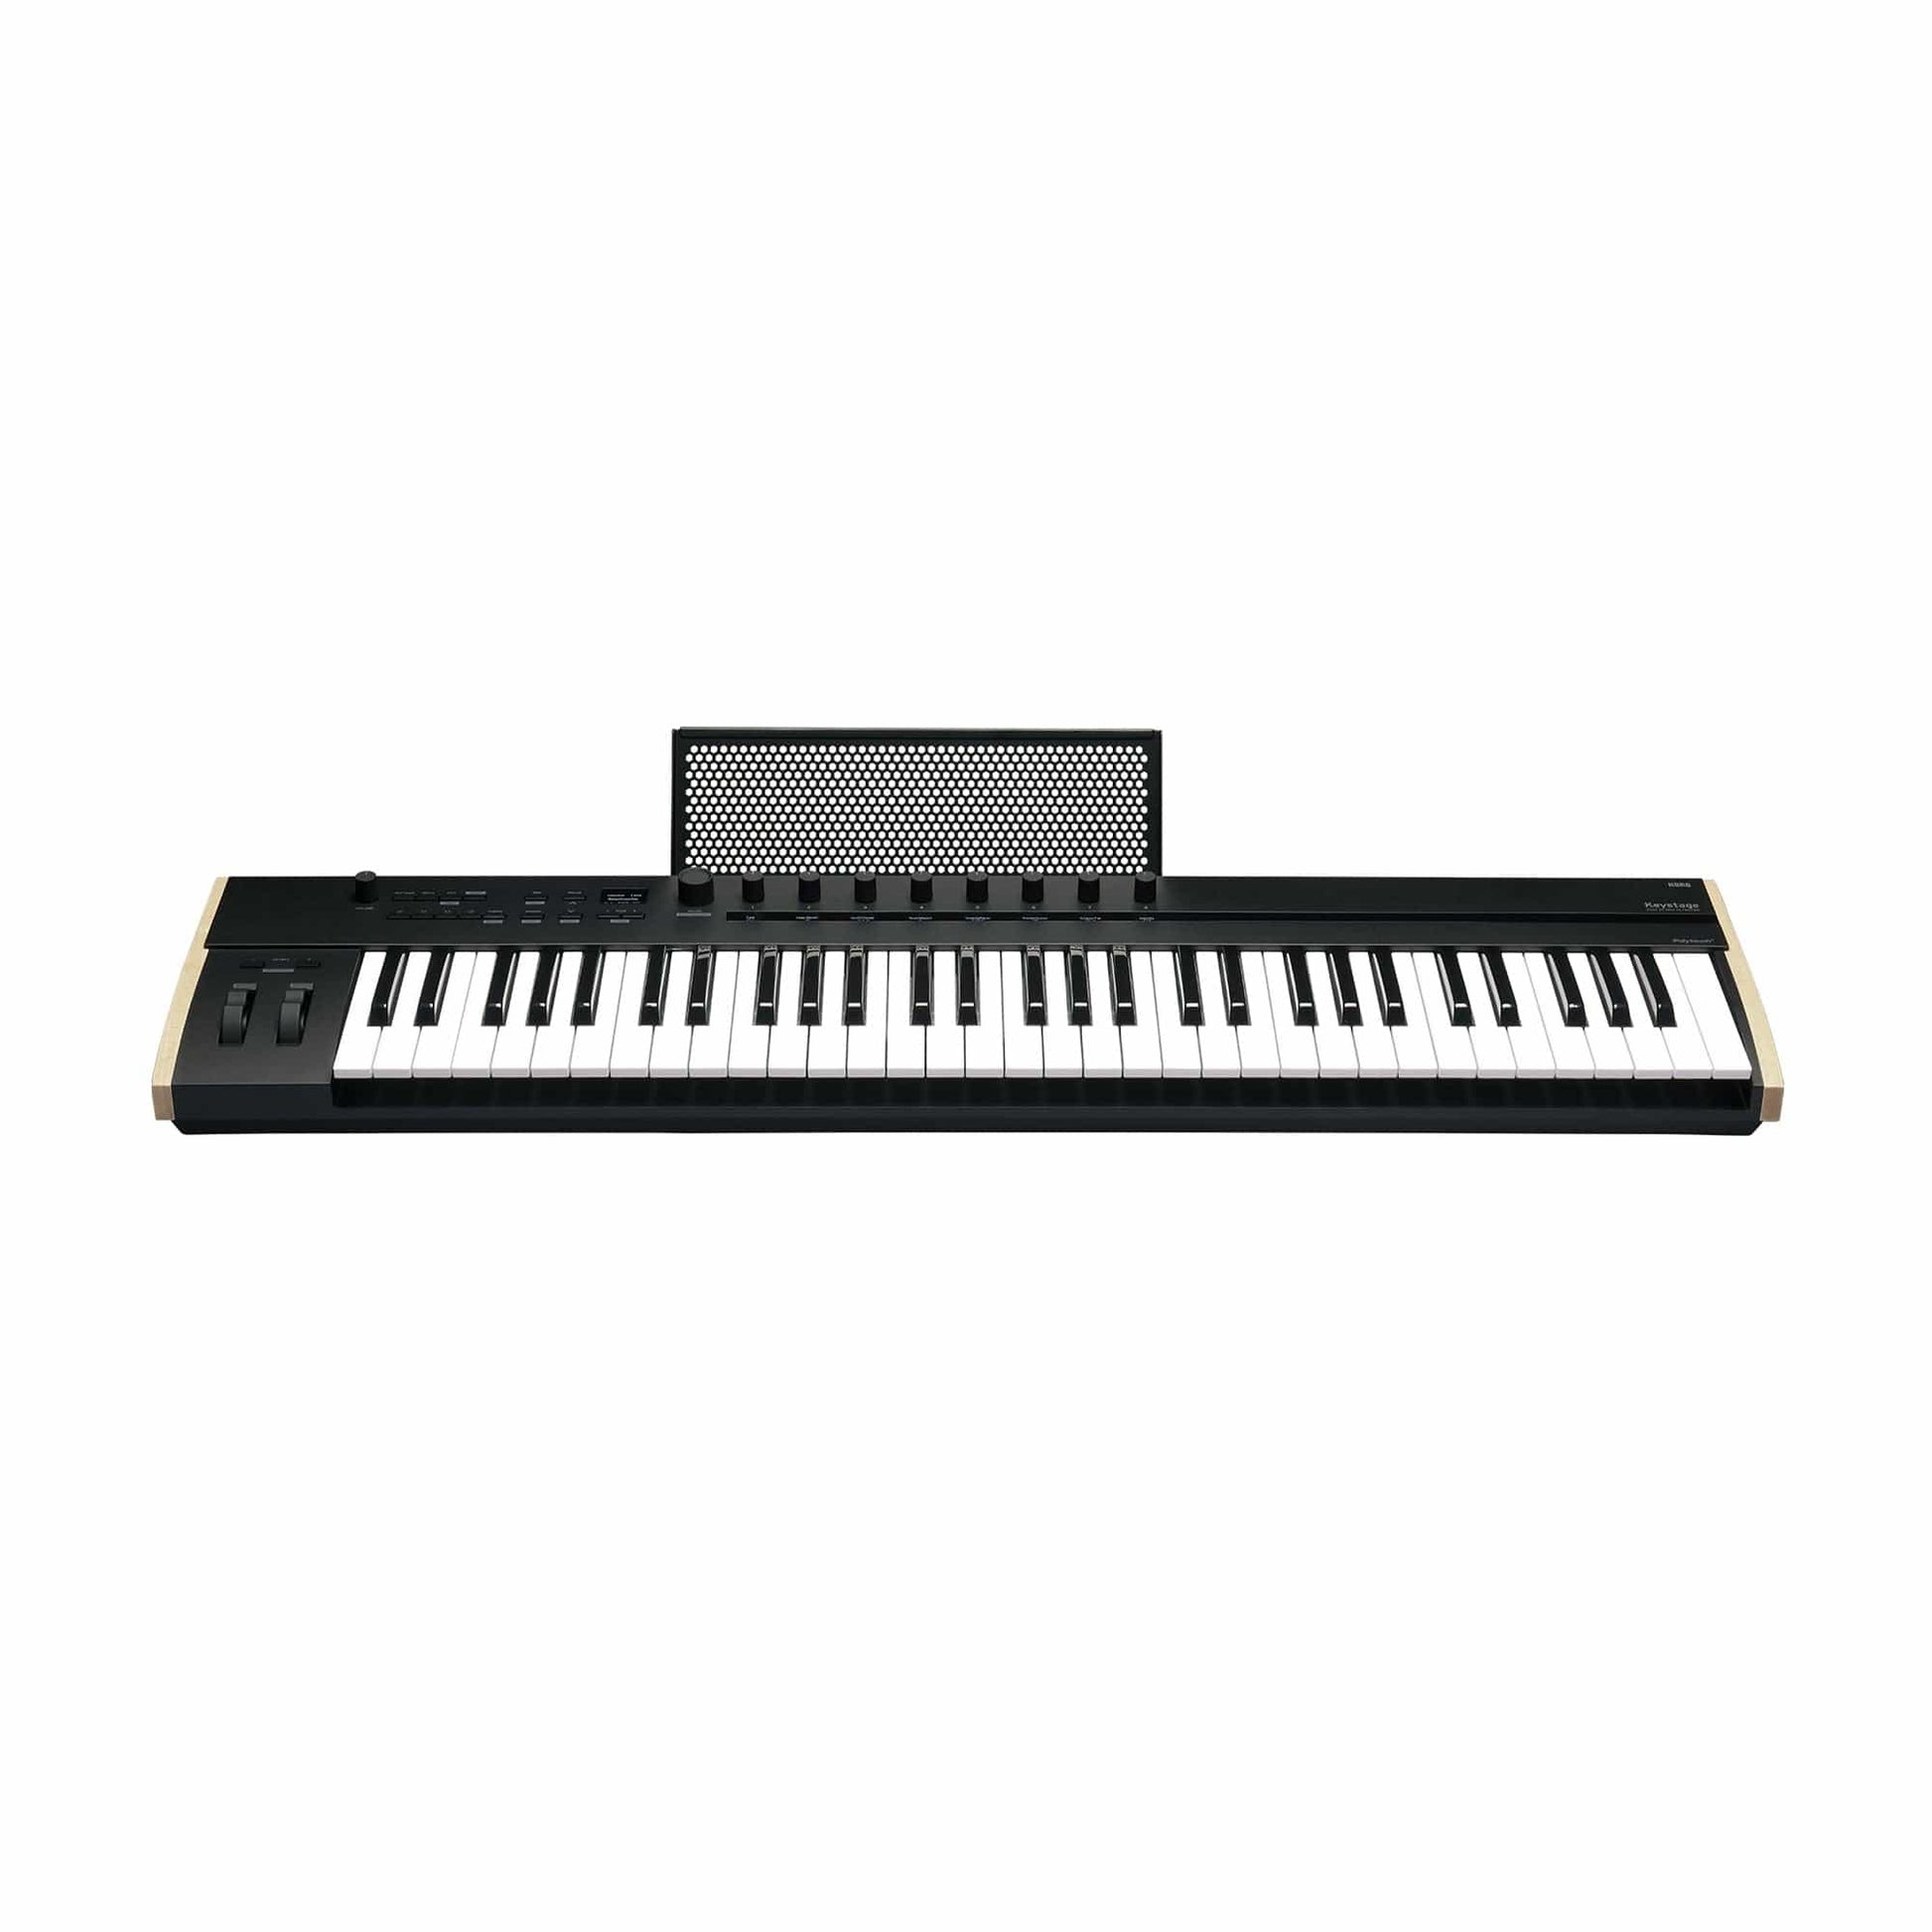 Korg Keystage 61 MIDI-Controller with Polyphonic Aftertouch Effects and Pedals / Controllers, Volume and Expression